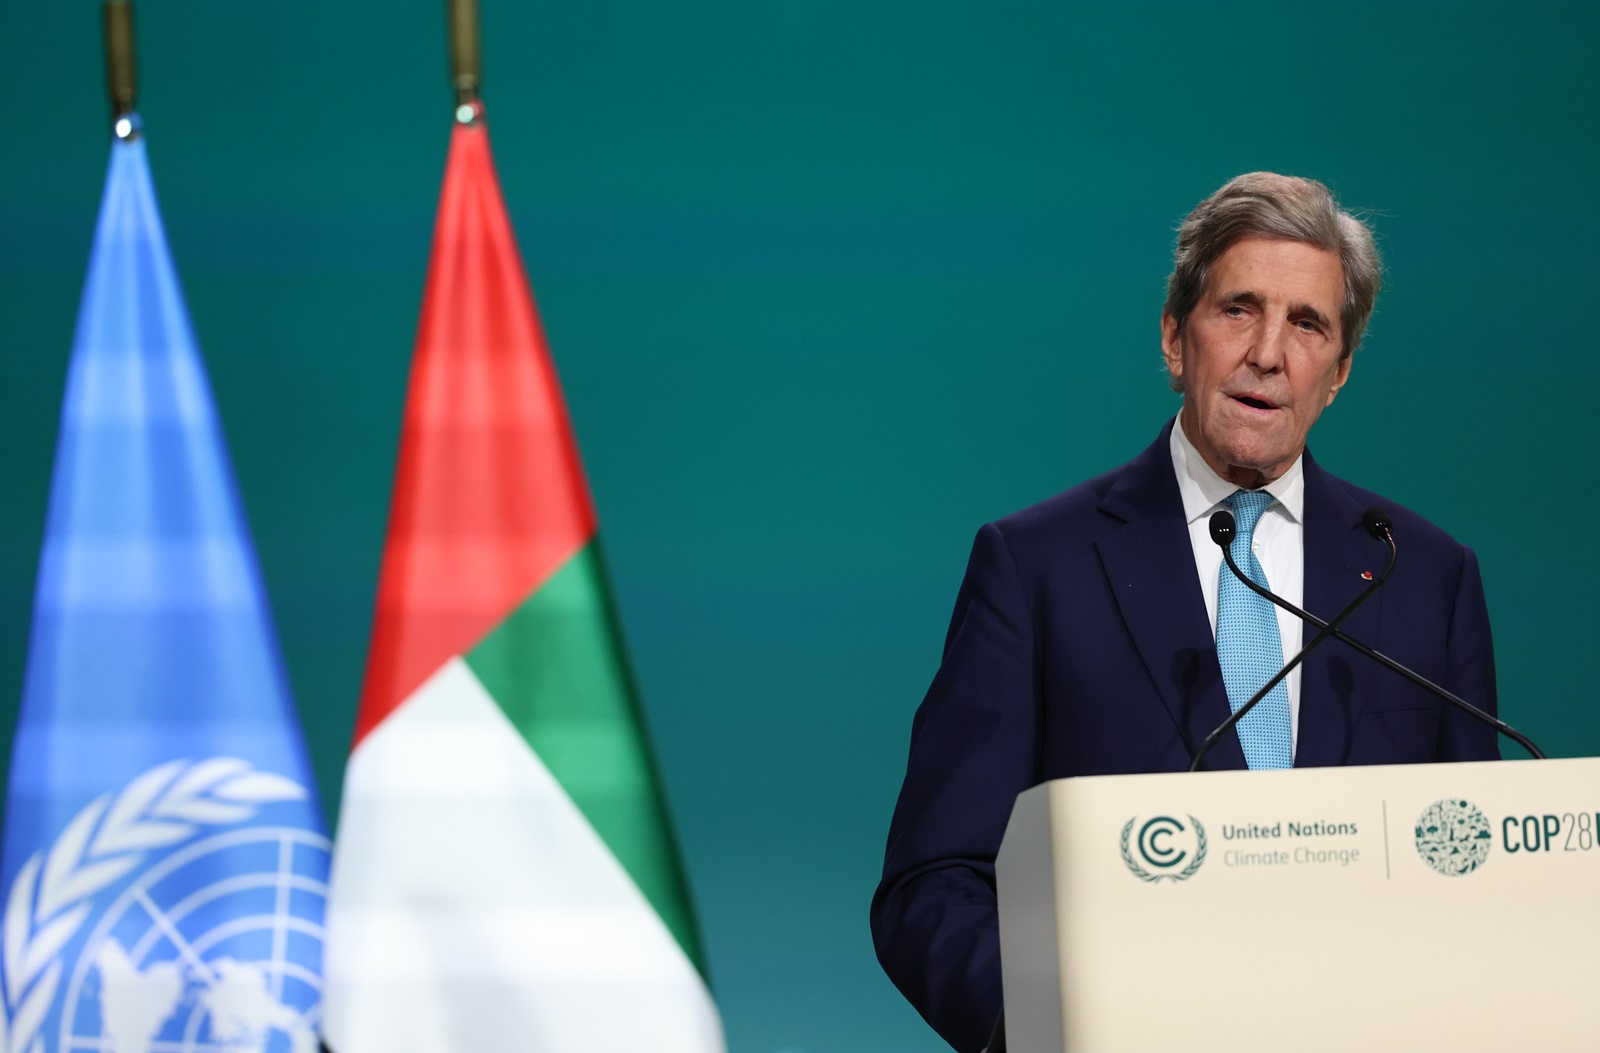 epa11010597 US Special Presidential Envoy for Climate John Kerry gives a speech during a session at the fifth day of the 2023 United Nations Climate Change Conference (COP28) at Expo City Dubai in Dubai, UAE, 04 December 2023. The 2023 United Nations Climate Change Conference (COP28), runs from 30 November to 12 December, and is expected to host one of the largest number of participants in the annual global climate conference as over 70,000 estimated attendees, including the member states of the UN Framework Convention on Climate Change (UNFCCC), business leaders, young people, climate scientists, Indigenous Peoples and other relevant stakeholders will attend.  EPA/ALI HAIDER